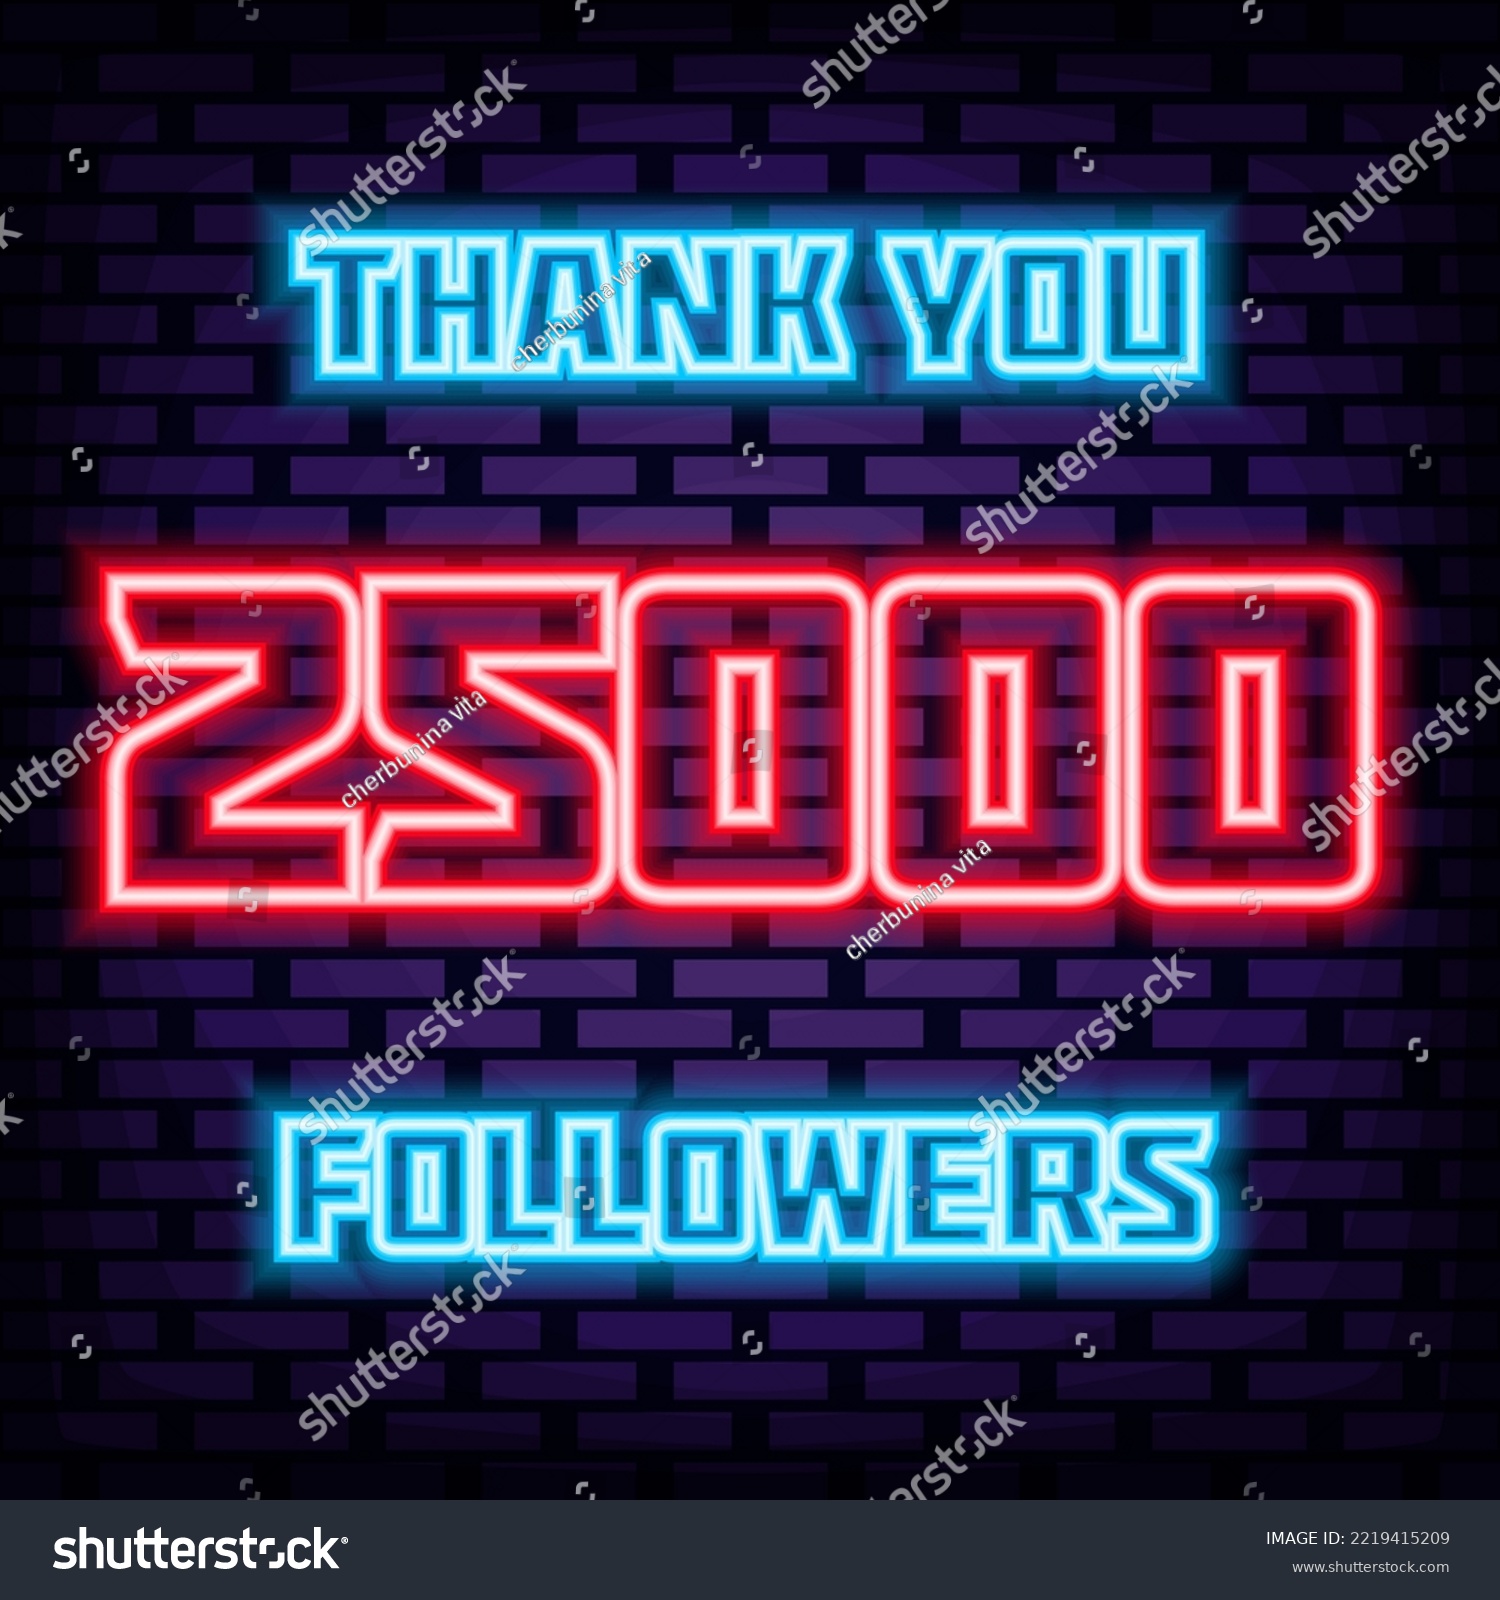 SVG of 25000 Followers Thank you Badge in neon style. Glowing with colorful neon light. Neon text. Trendy design elements. Vector Illustration svg